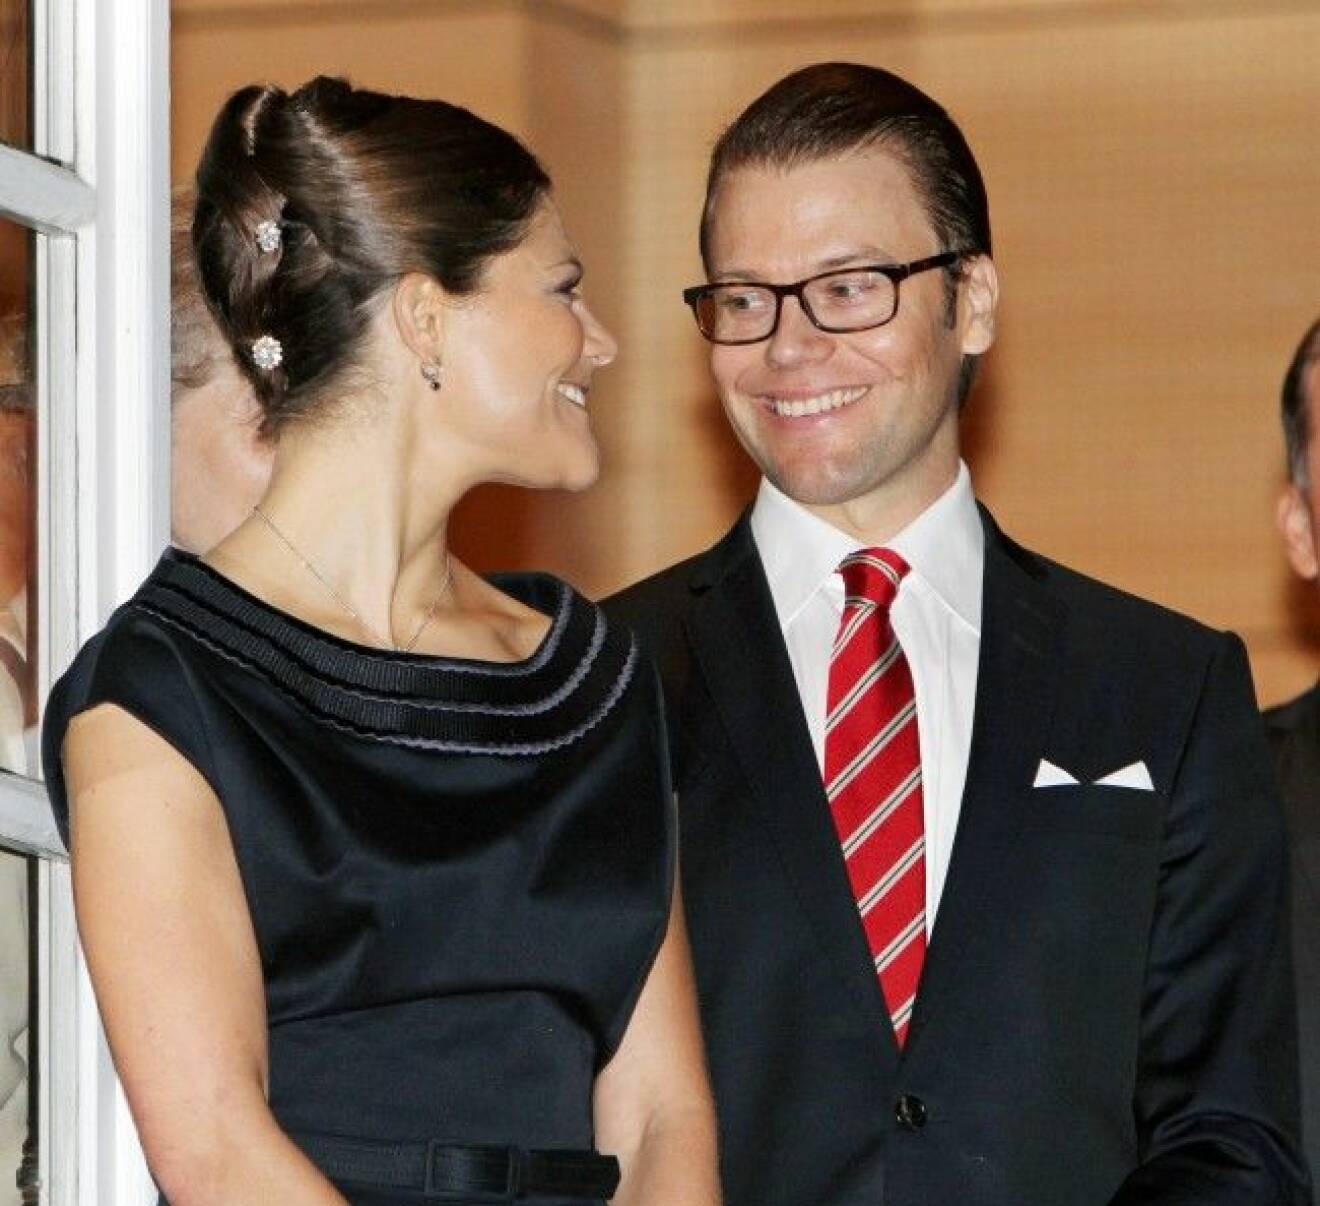 Crown Princess Victoria of Sweden and her husband Prince Daniel visit the Swedish Institute in Paris, France, 26 September 2010. The Crown couple are on an official visit in France. Photo: Patrick van Katwijk (c) DPA / IBL Bildbyrå